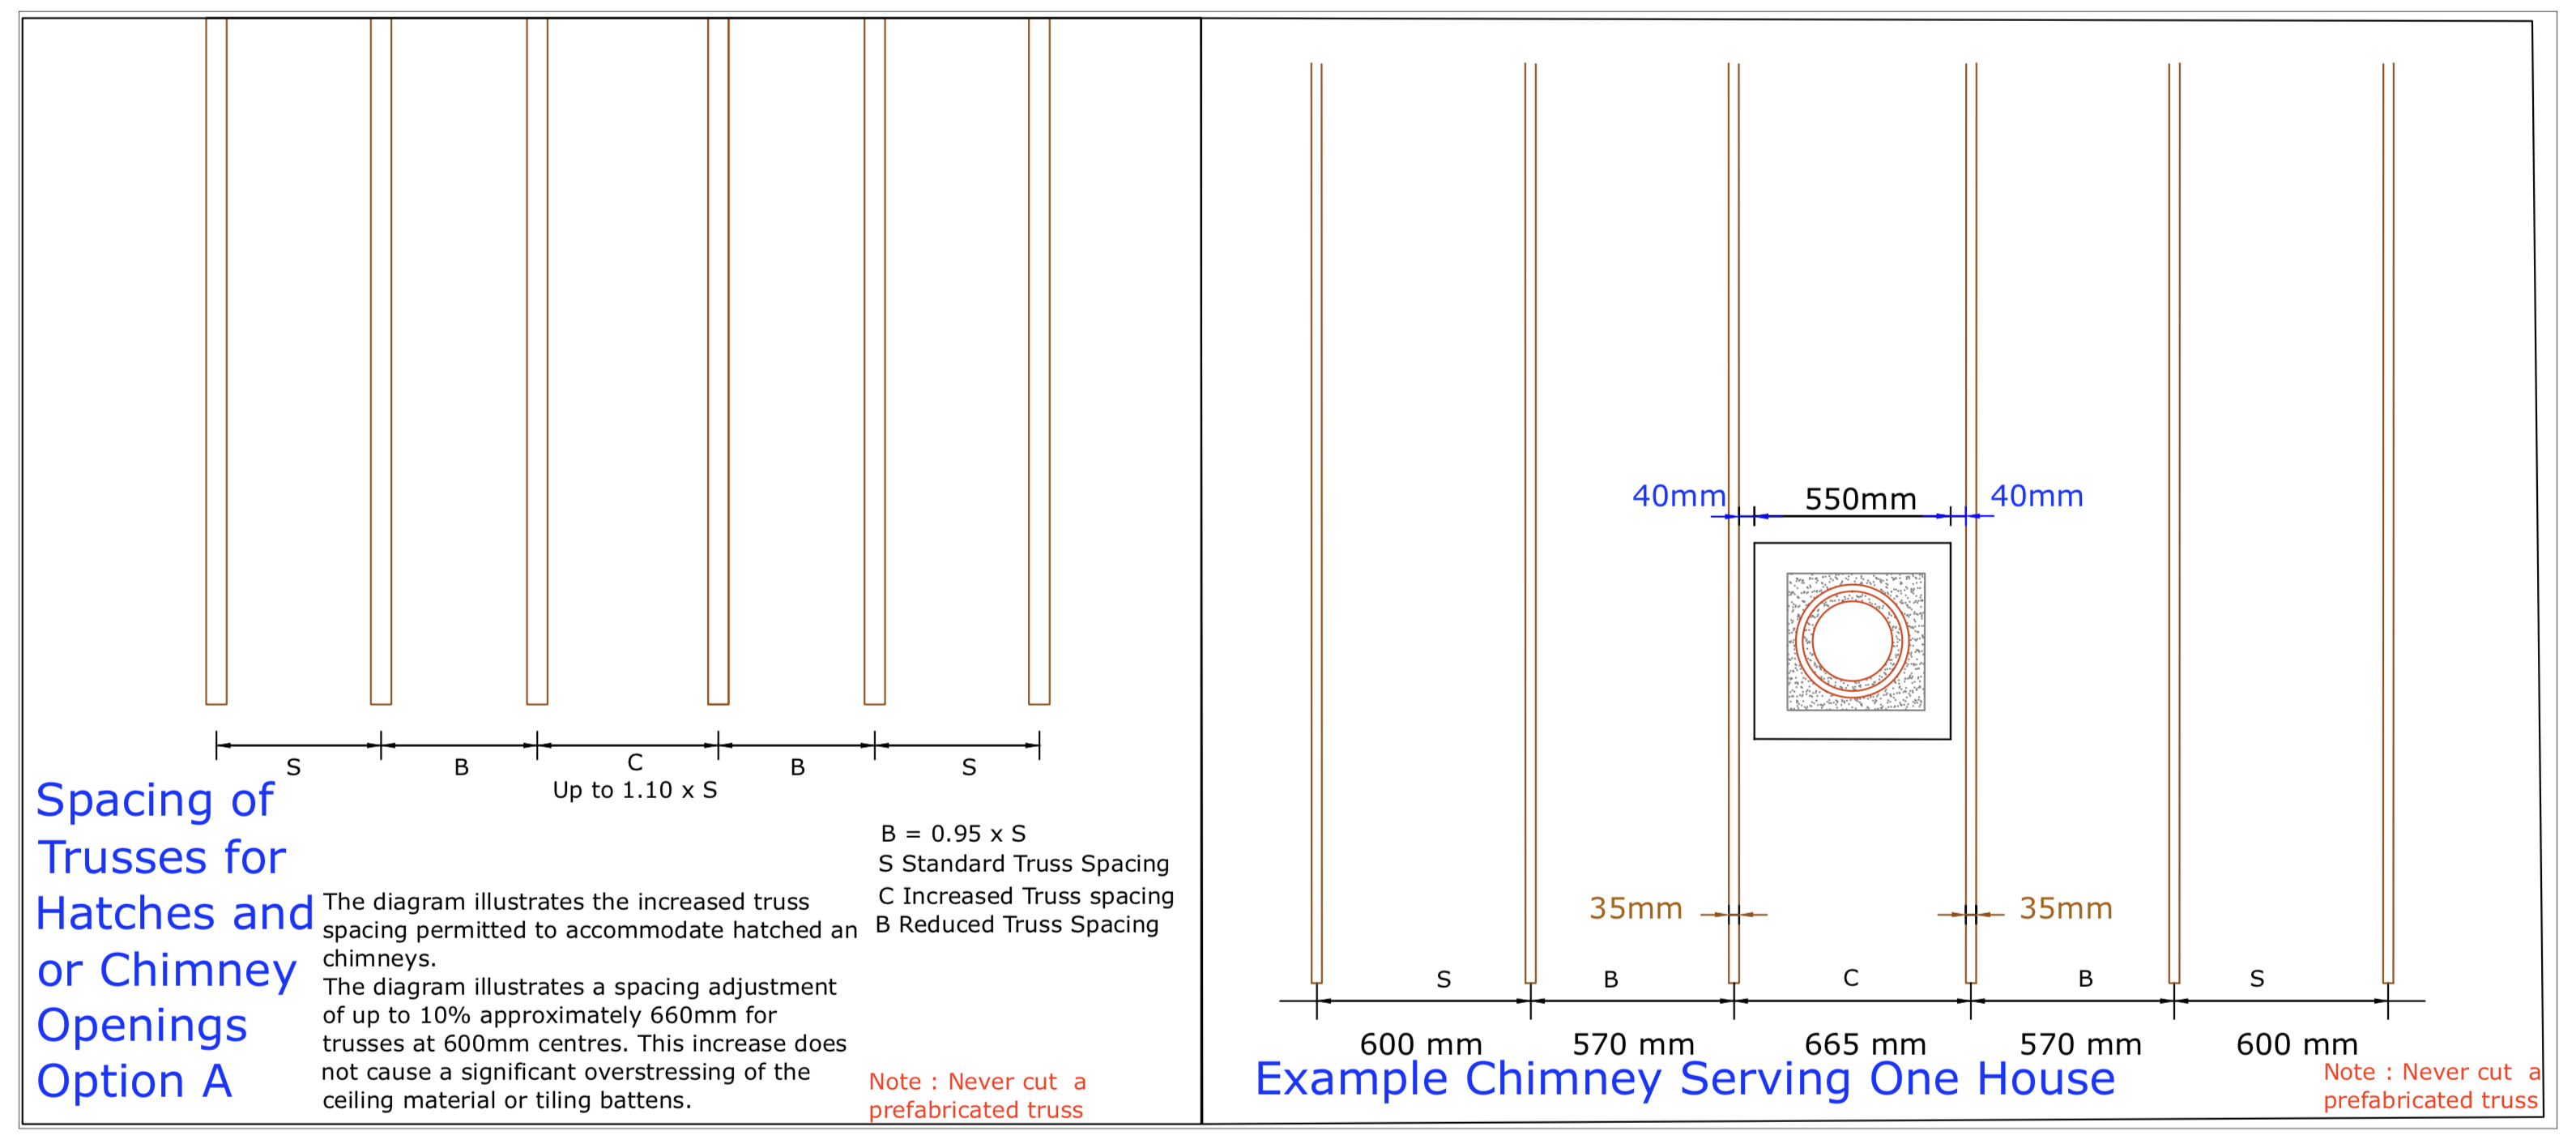 DIAGRAM 14 Chimney Opening less than 660mm